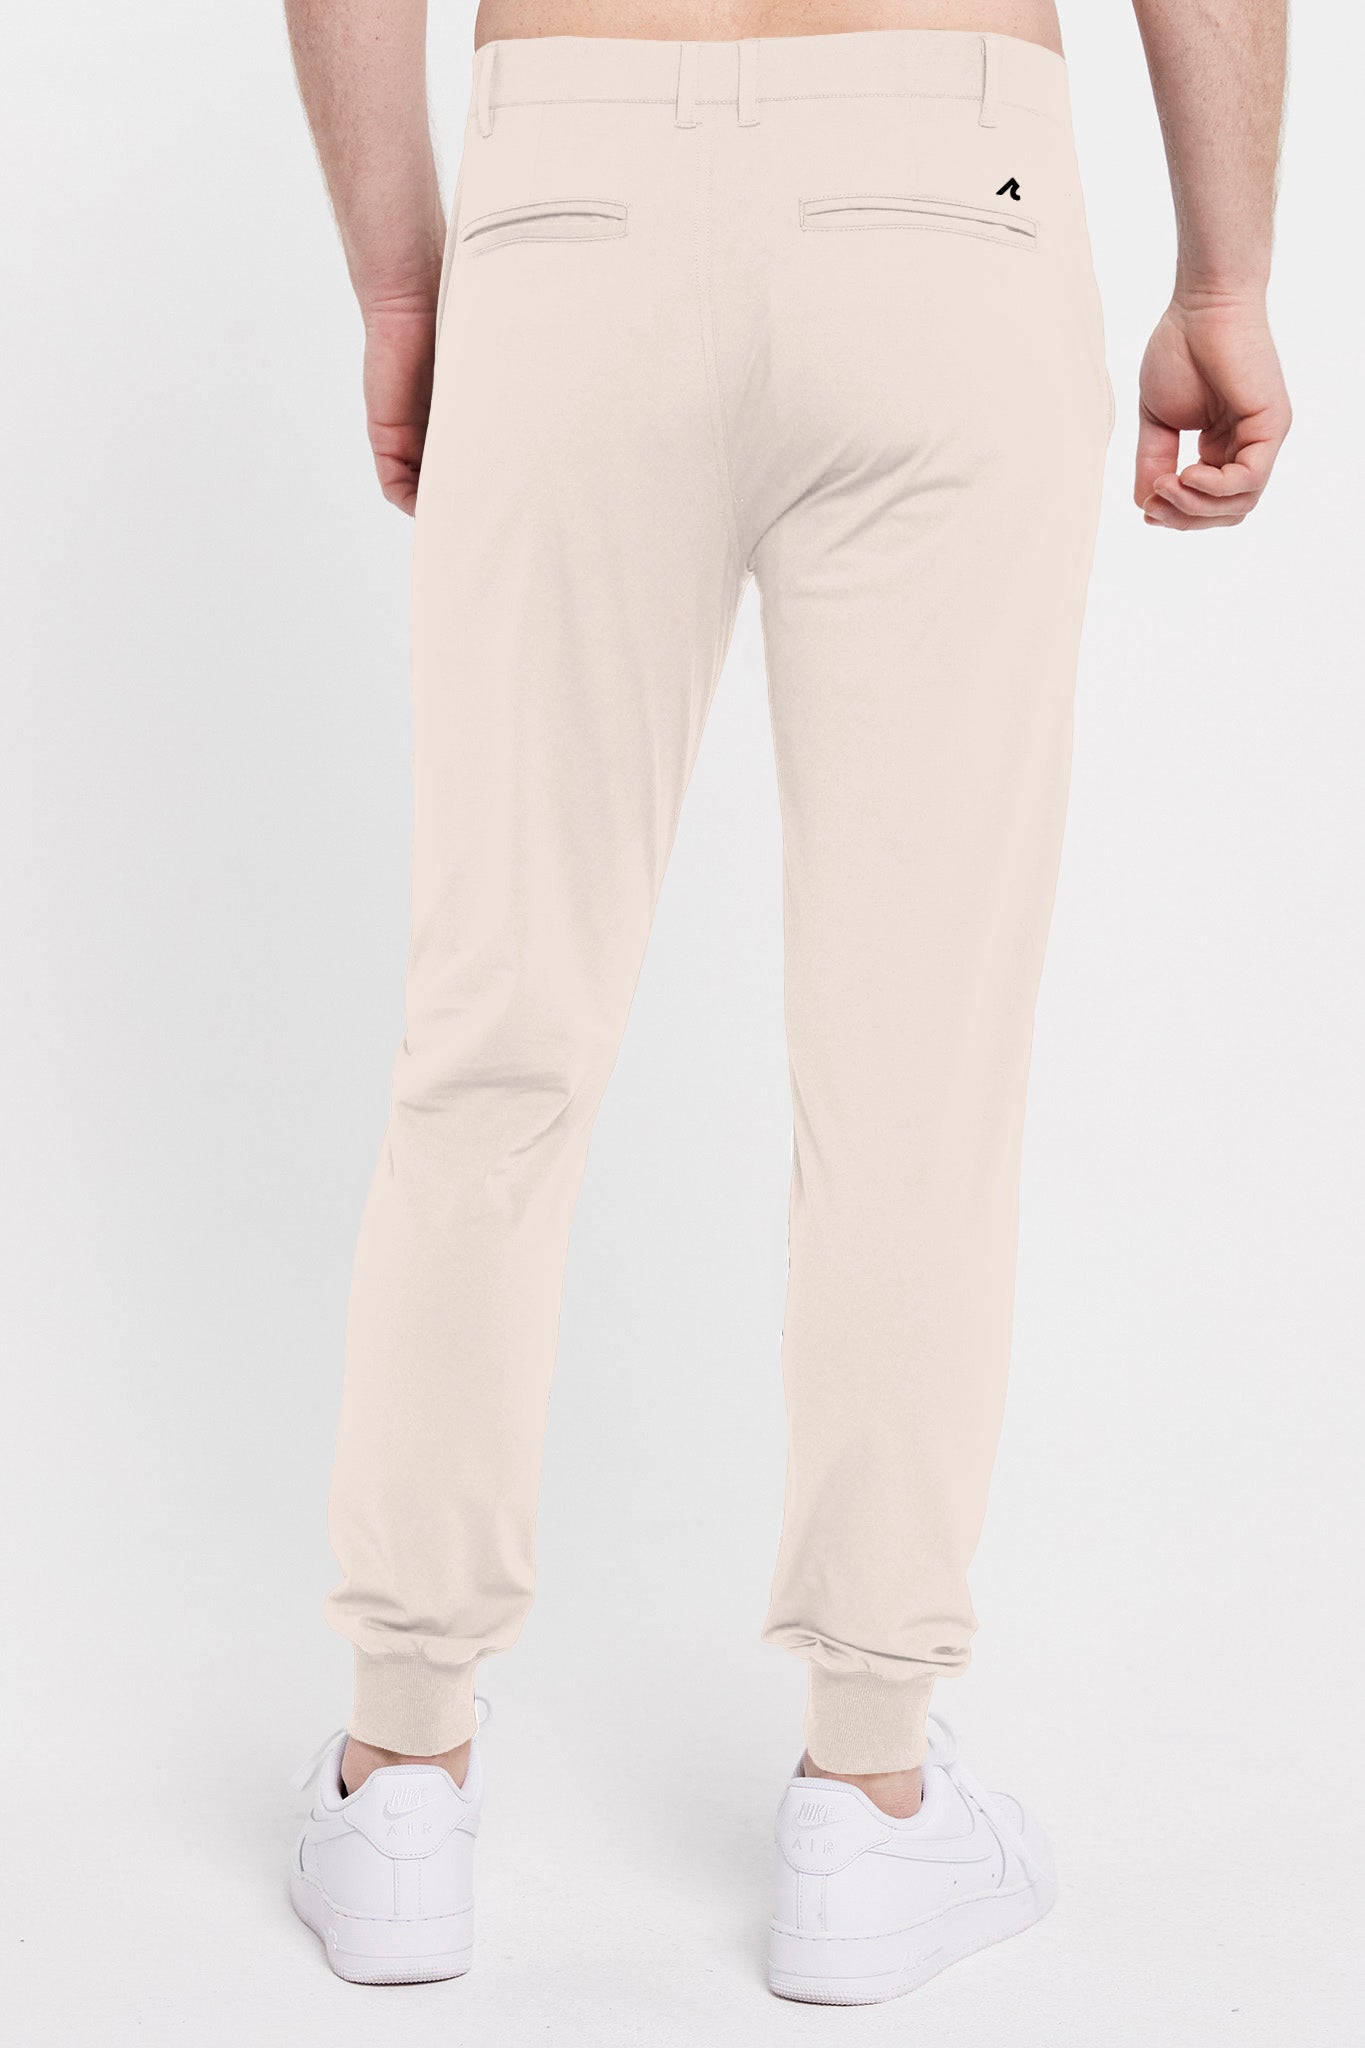 Image of the halliday pull-on jogger in macadamia